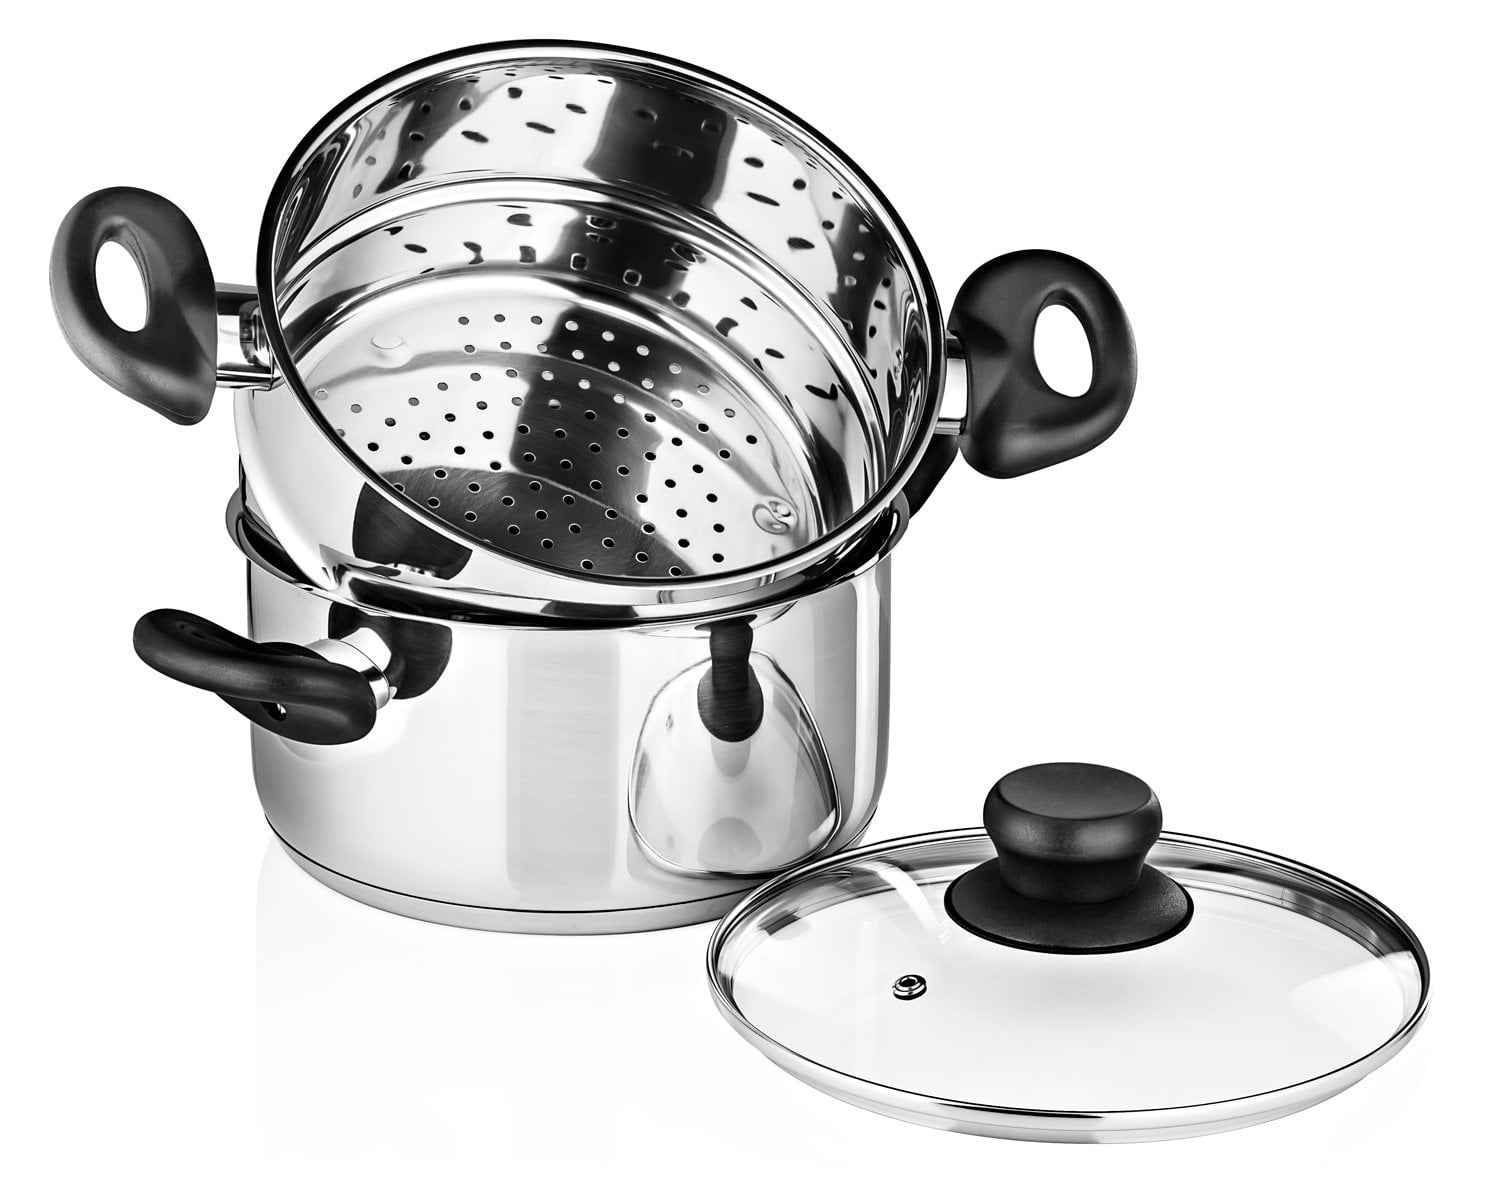 Nevlers 3 Piece Premium Heavy Duty Stainless Steel Steamer Pot Set Includes  3 Quart Cooking Pot, 2 Quart Steamer Insert and Vented Glass Lid | Stack